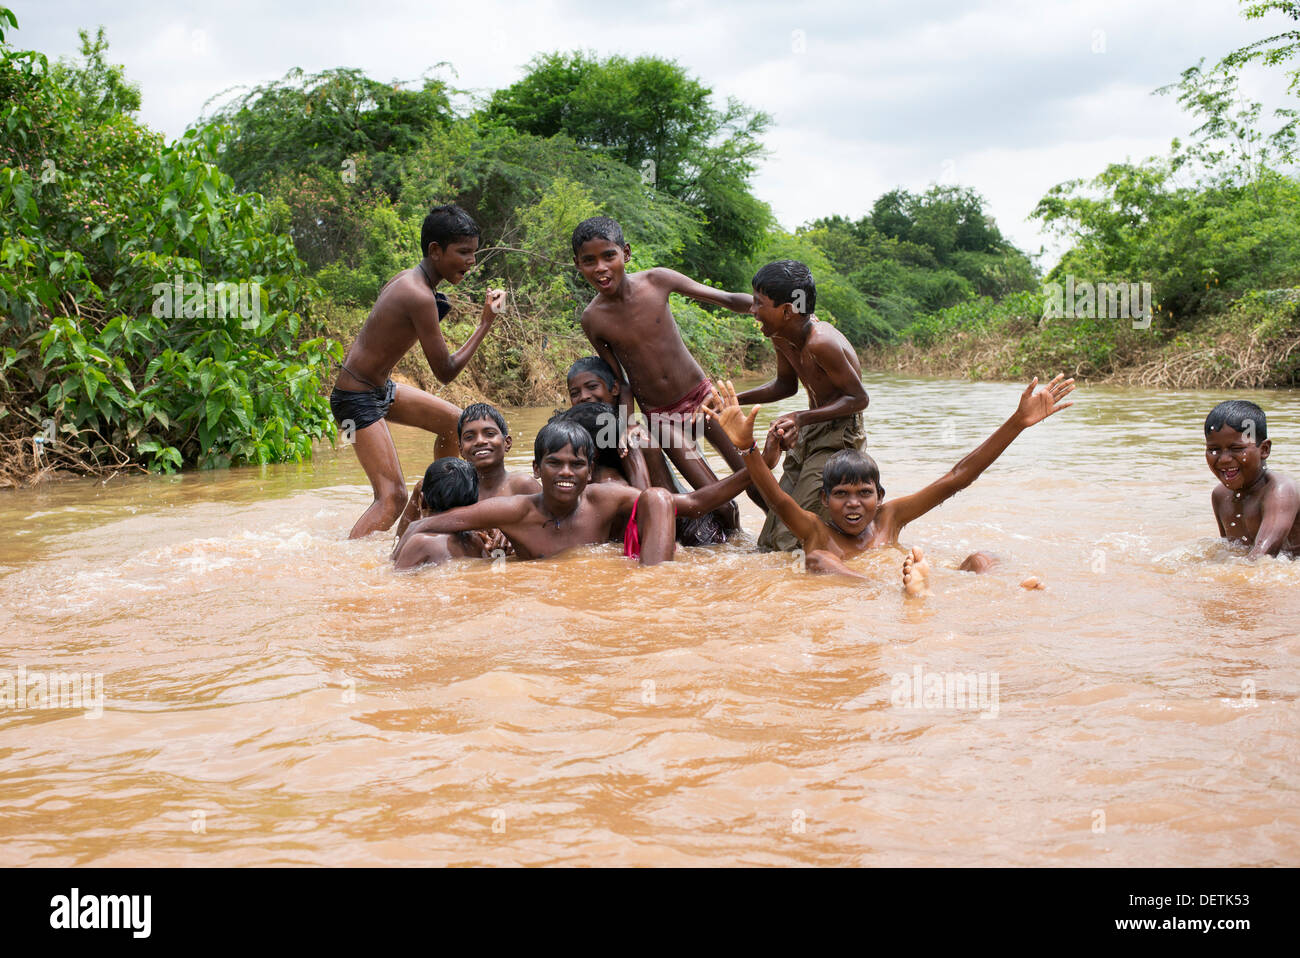 Rural Indian village boys playing and messing about in a flooded river. Andhra Pradesh, India Stock Photo